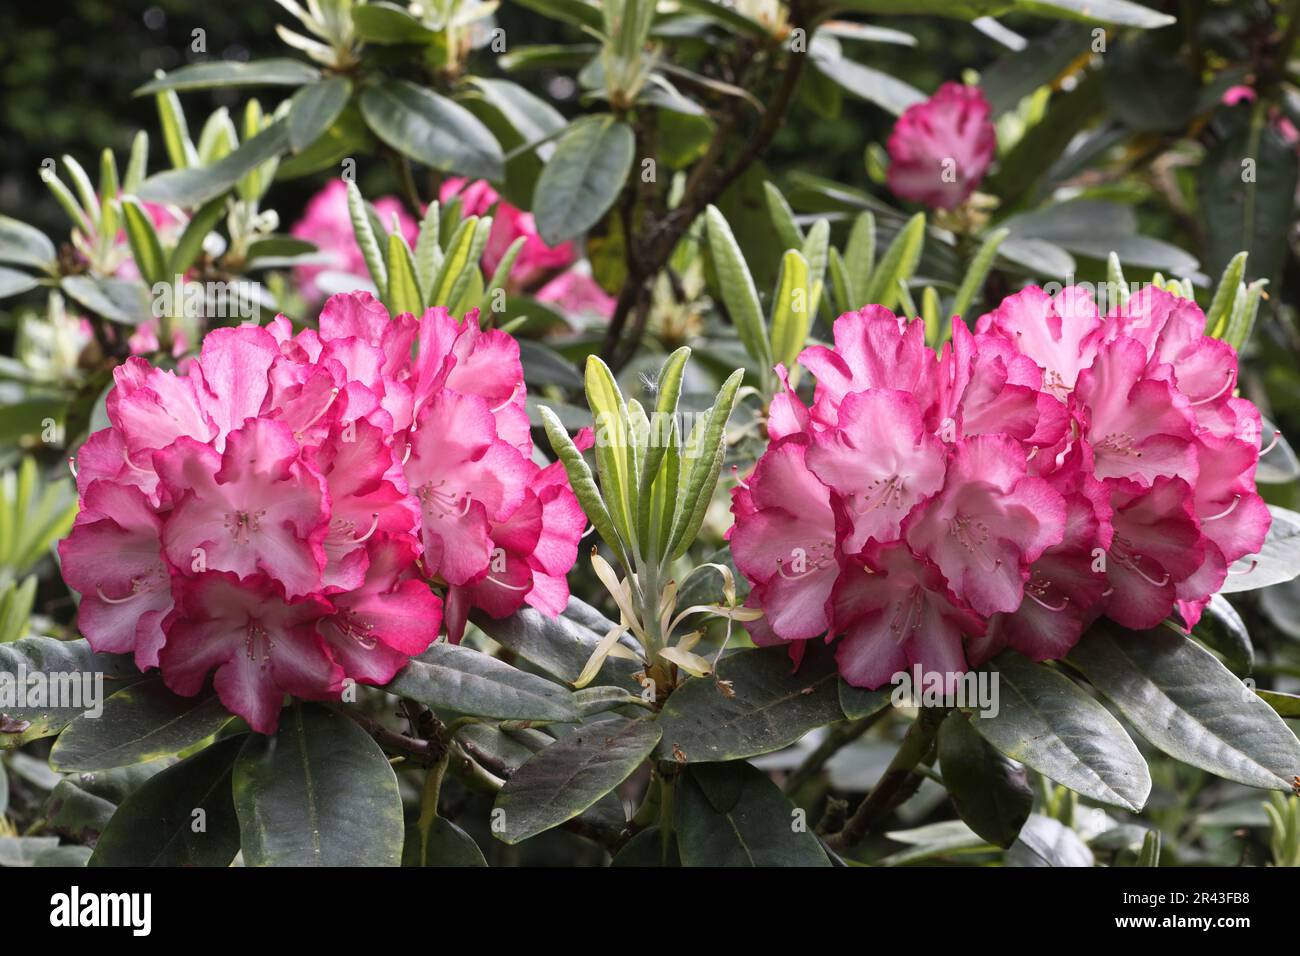 Rhododendron blossom (Rhododendron Ann Lindsay), Emsland, Lower Saxony, Germany Stock Photo